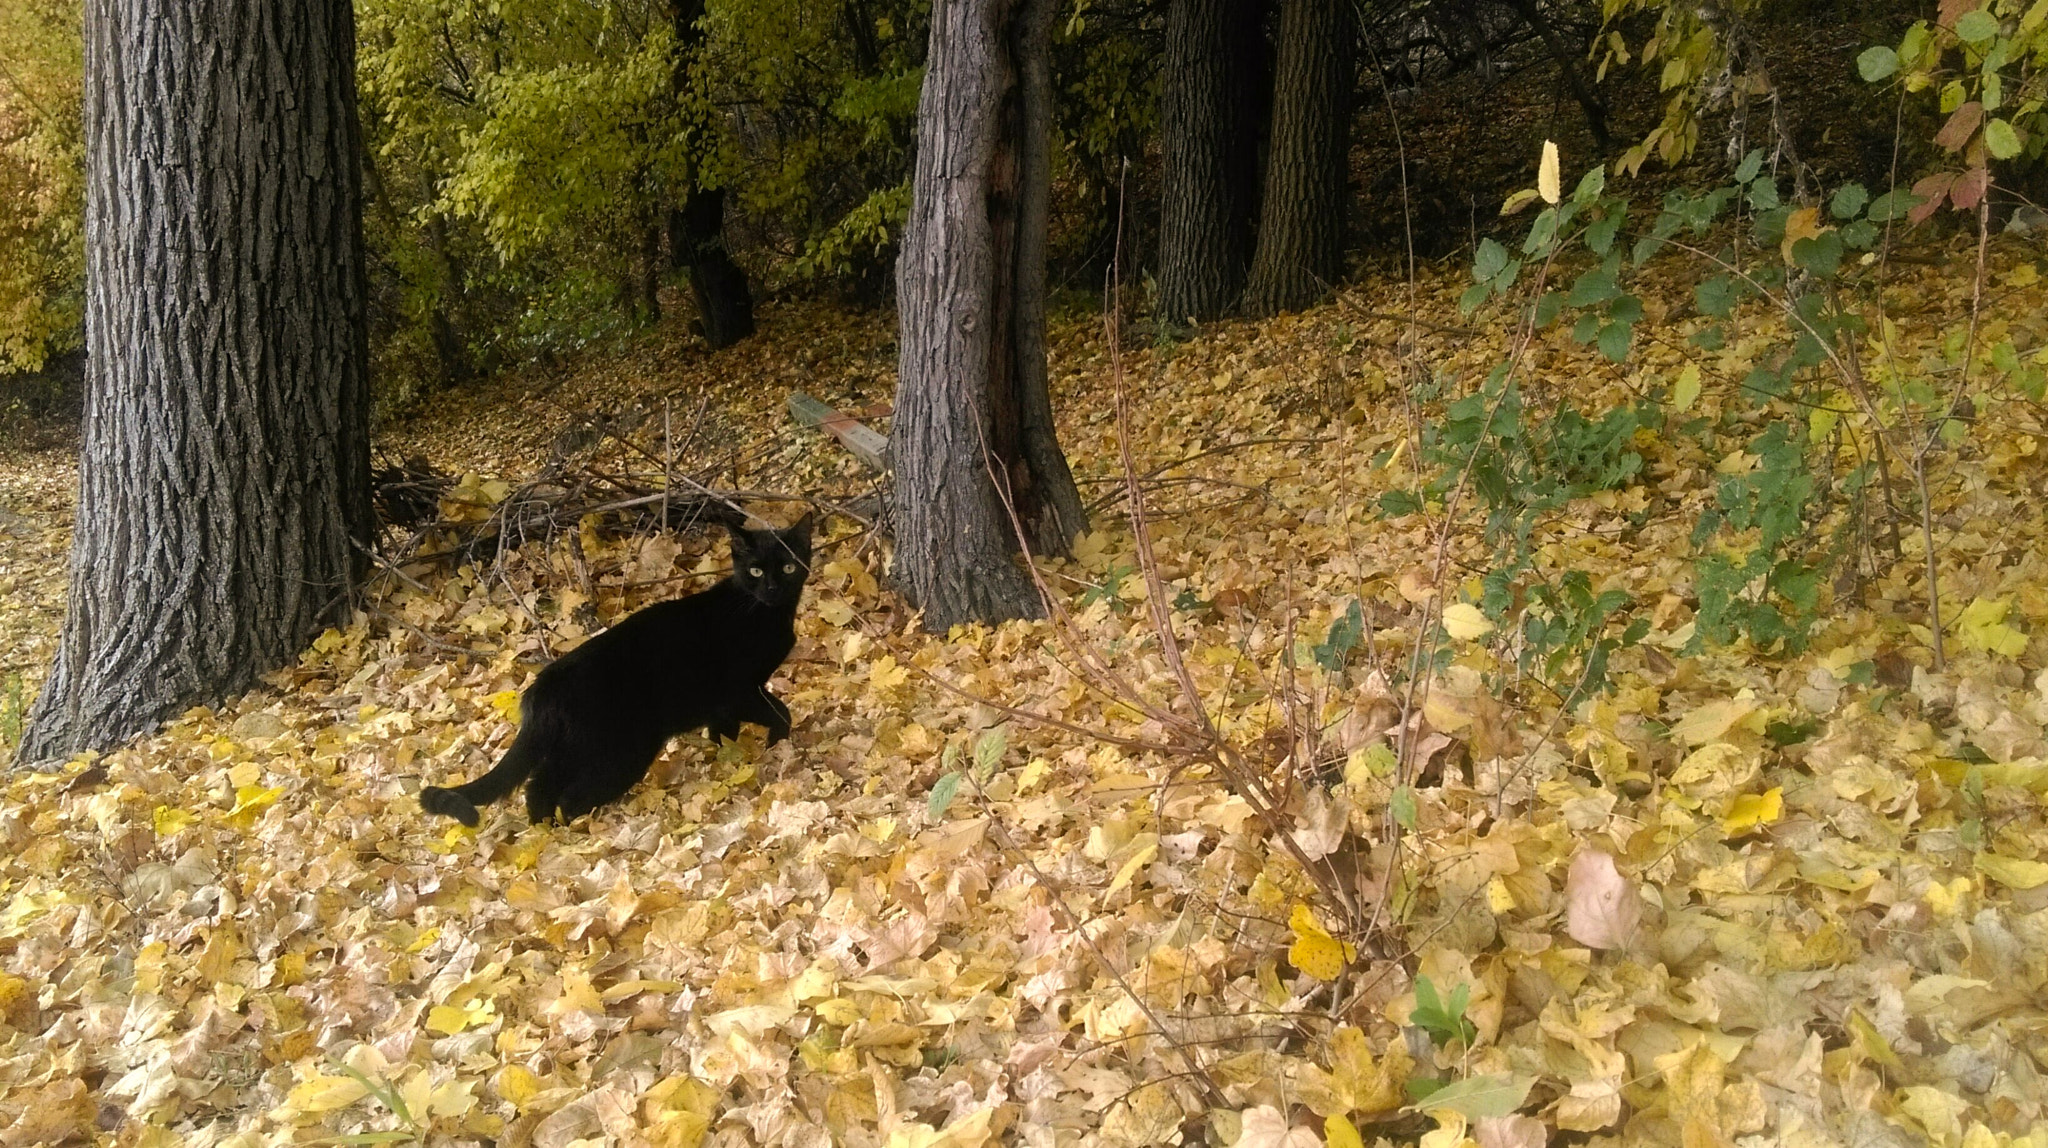 HTC DESIRE 820 sample photo. Cat and the autumn forest photography